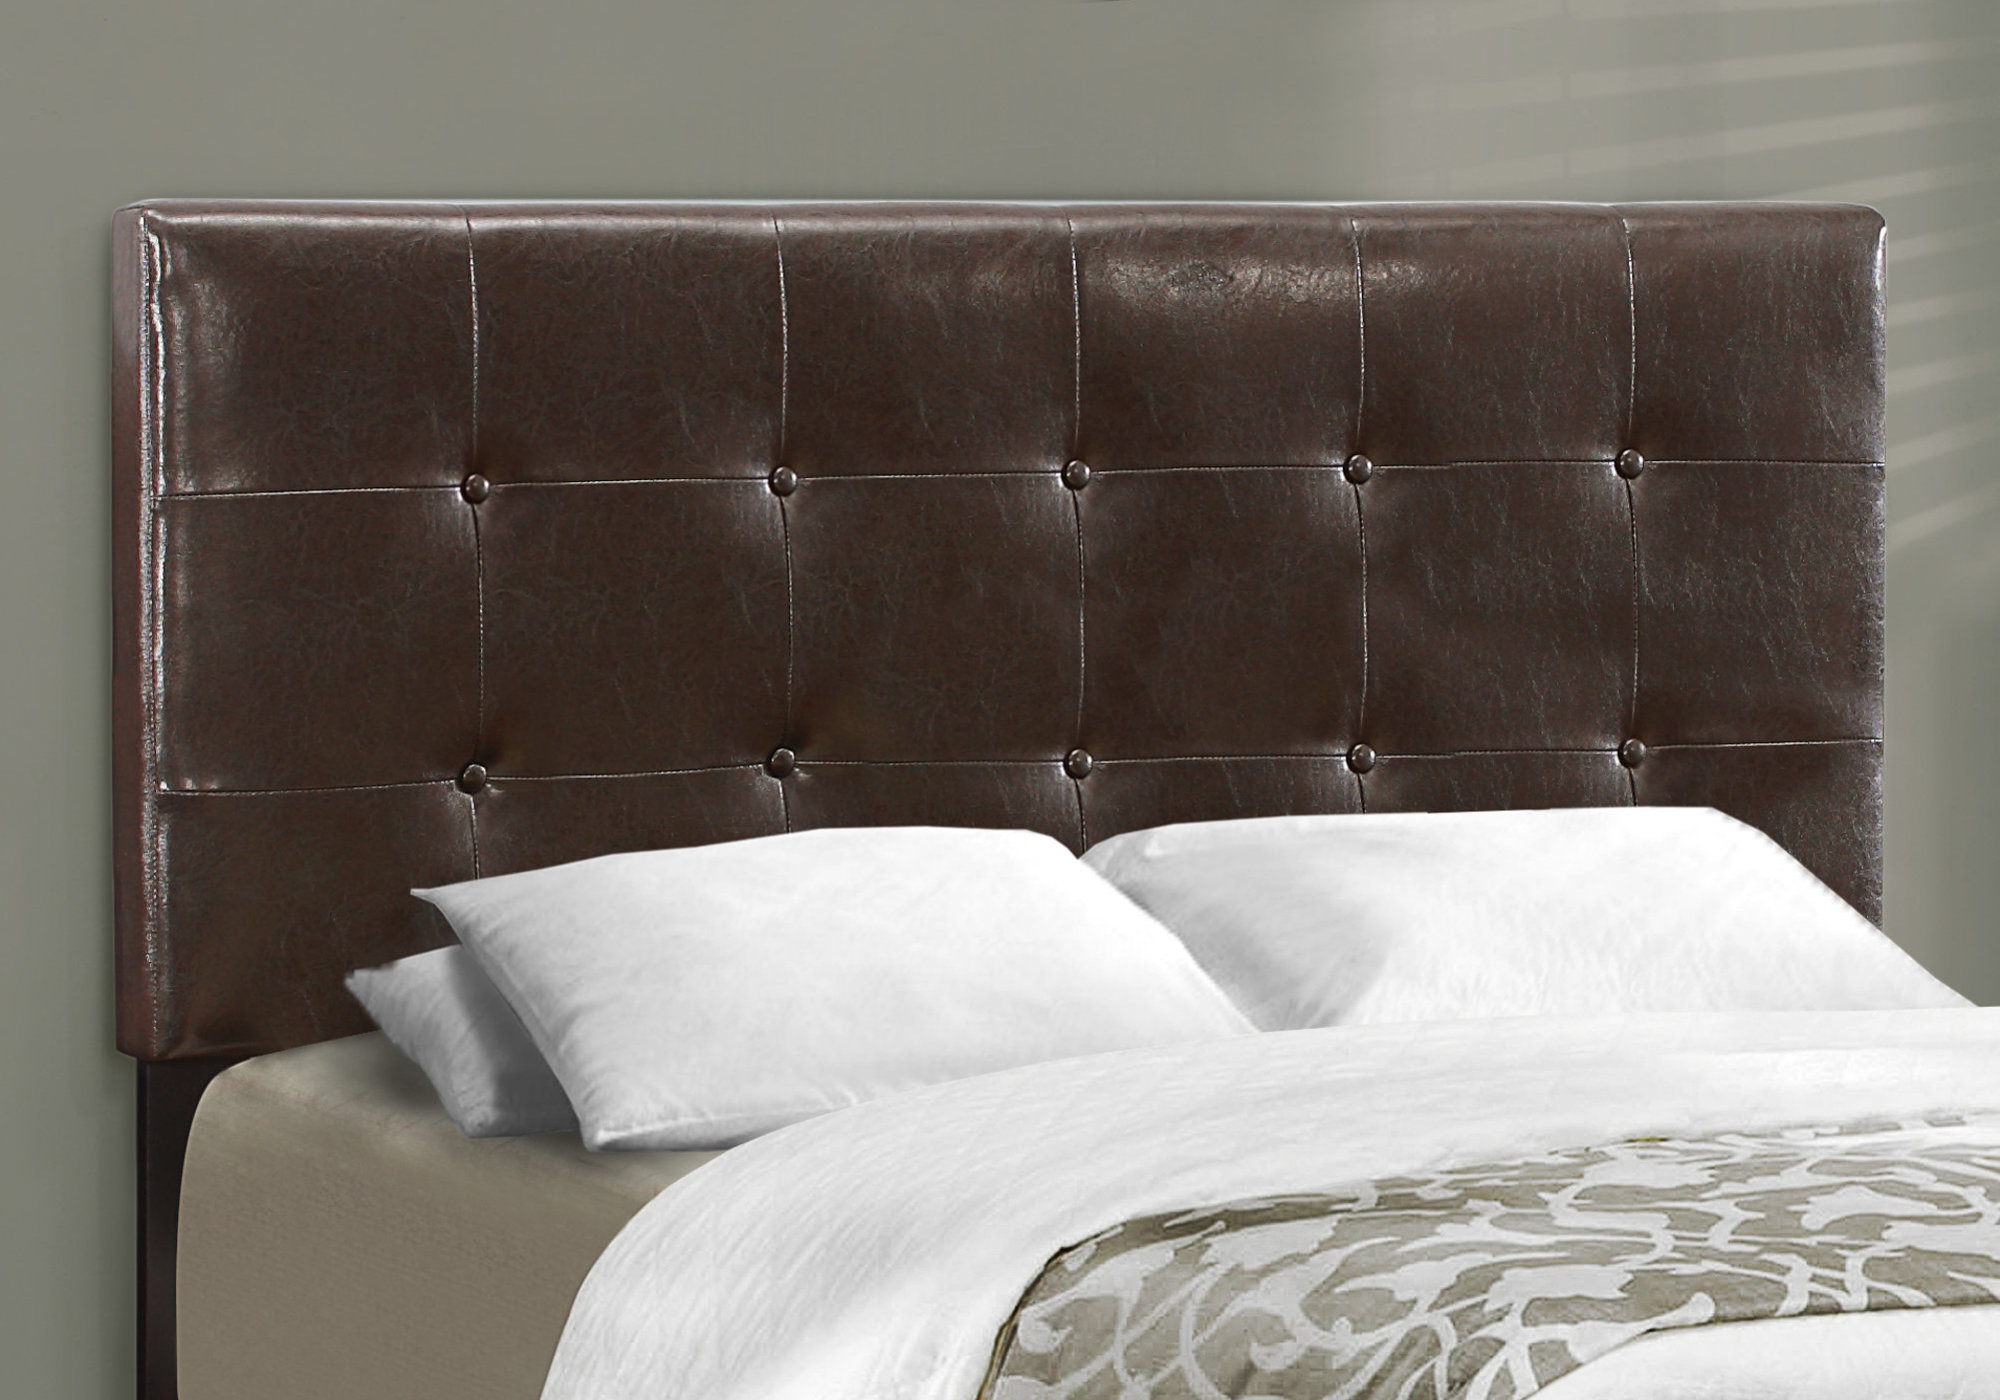 BED - FULL SIZE / DARK BROWN TUFTED LEATHER-LOOK